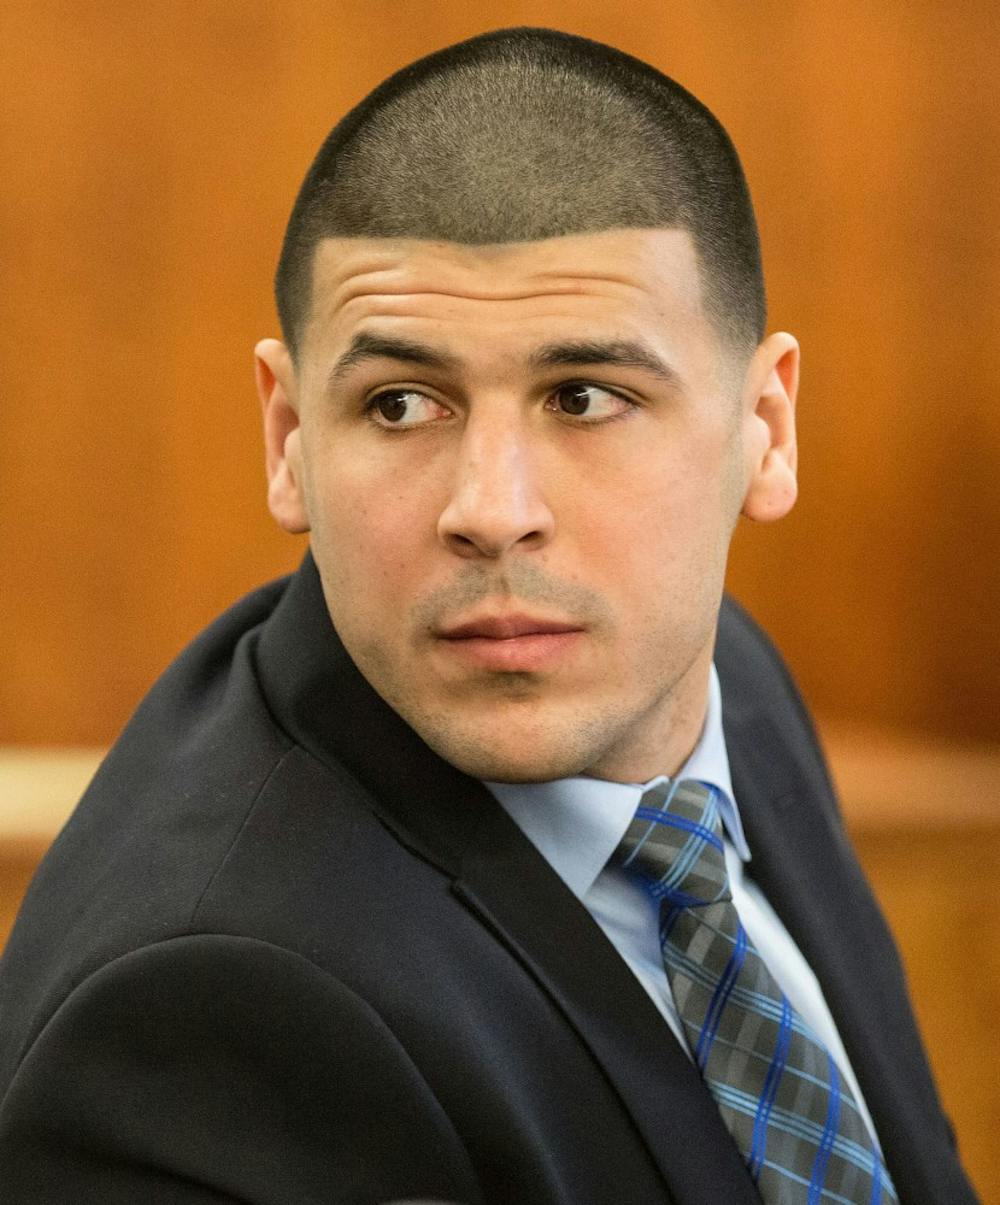 Former New England Patriots tight end Aaron Hernandez listens during his murder trial on Tuesday, March 31, 2015, at Bristol County Superior Court in Fall River, Mass. Hernandez was convicted of first-degree murder in the 2013 killing of Odin Lloyd on Wednesday, April 15, 2015, and sentenced to life in prison without the possibility of parole. (Aram Boghosian/Prensa Internacional/Zuma Press/TNS)